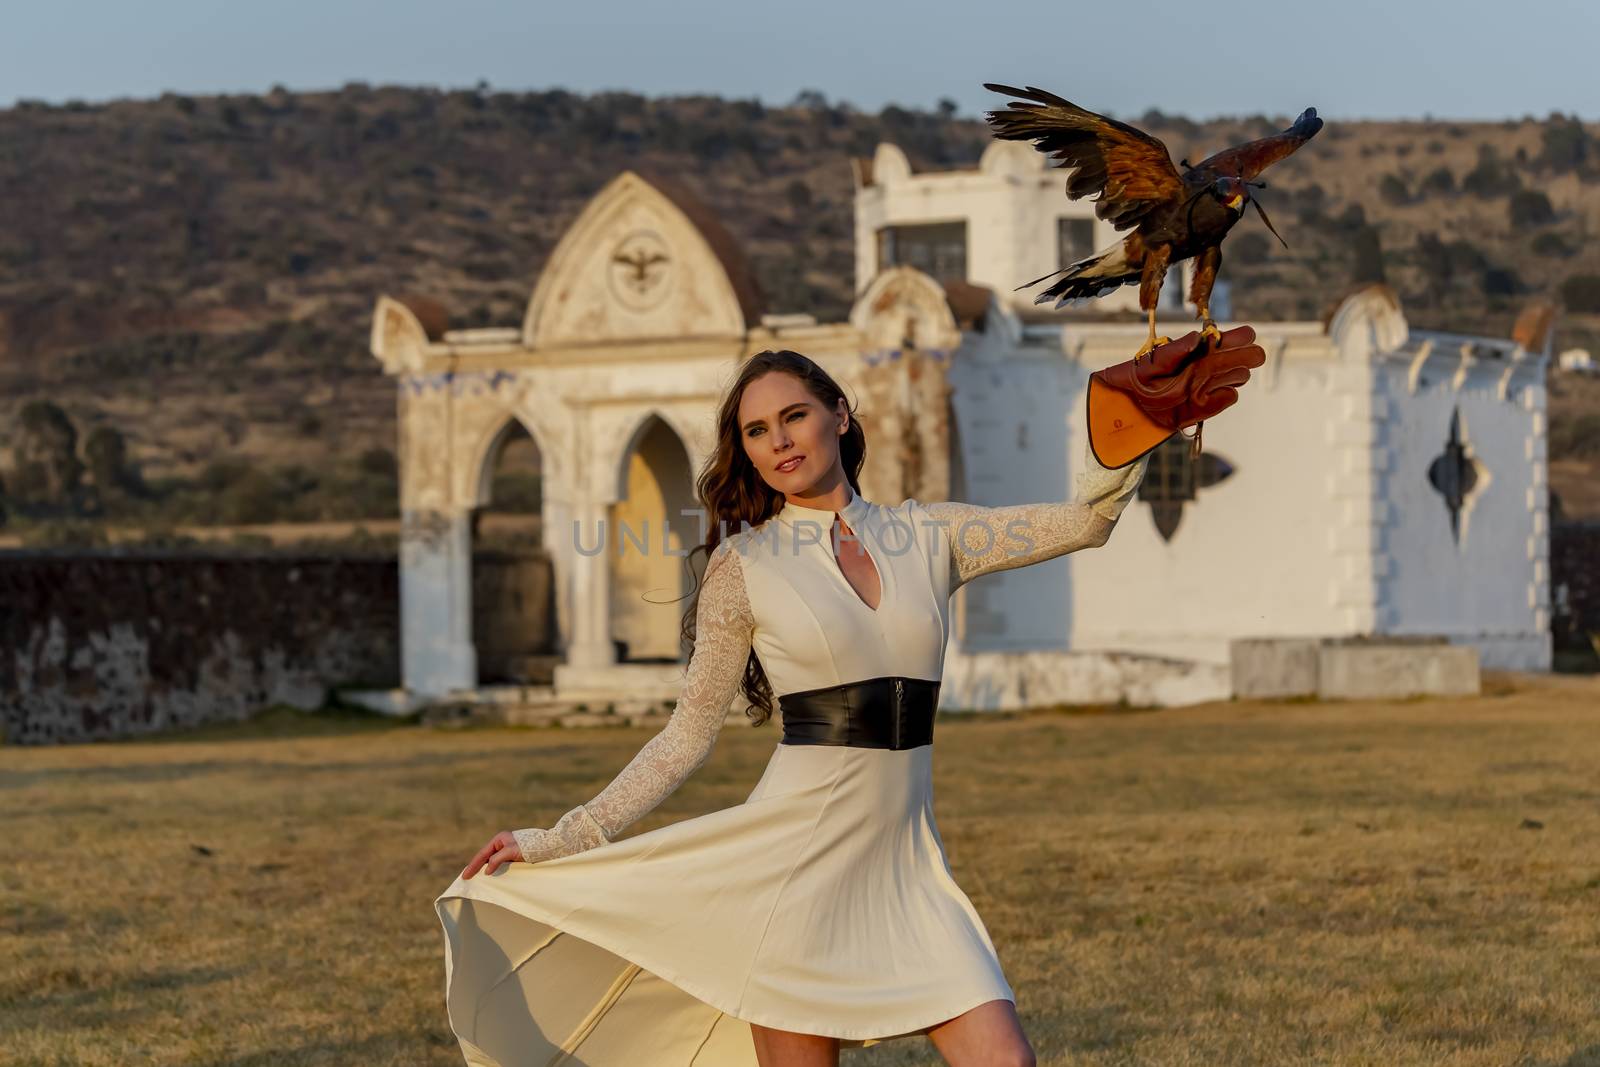 A Lovely Hispanic Brunette Model Poses Outdoors With A Falcon At A Hacienda by actionsports